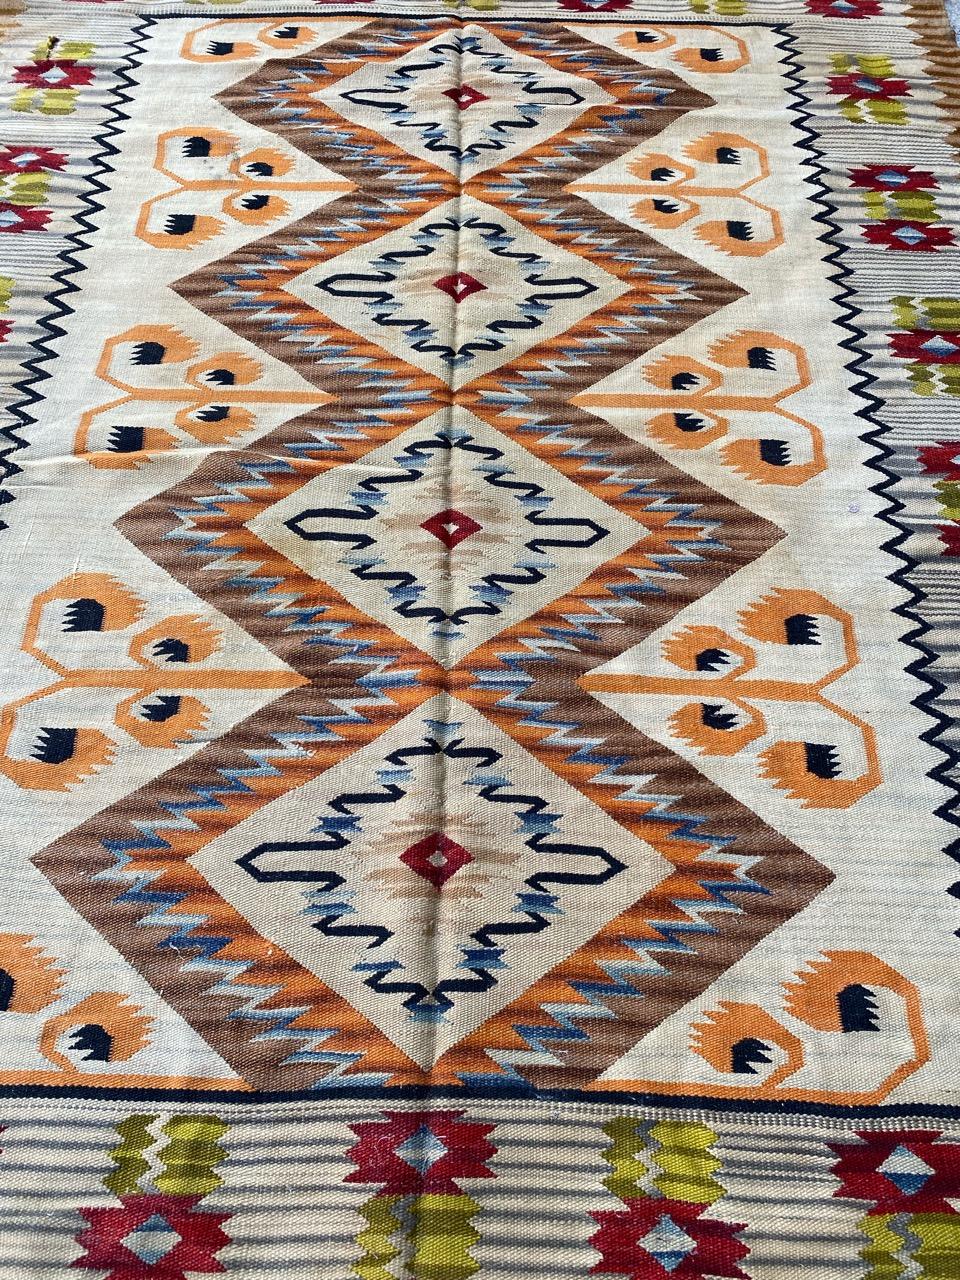 Wonderful mid century Scandinavian Kilim rug with nice geometrical design and beautiful colors, entirely hand woven with wool on cotton foundation.